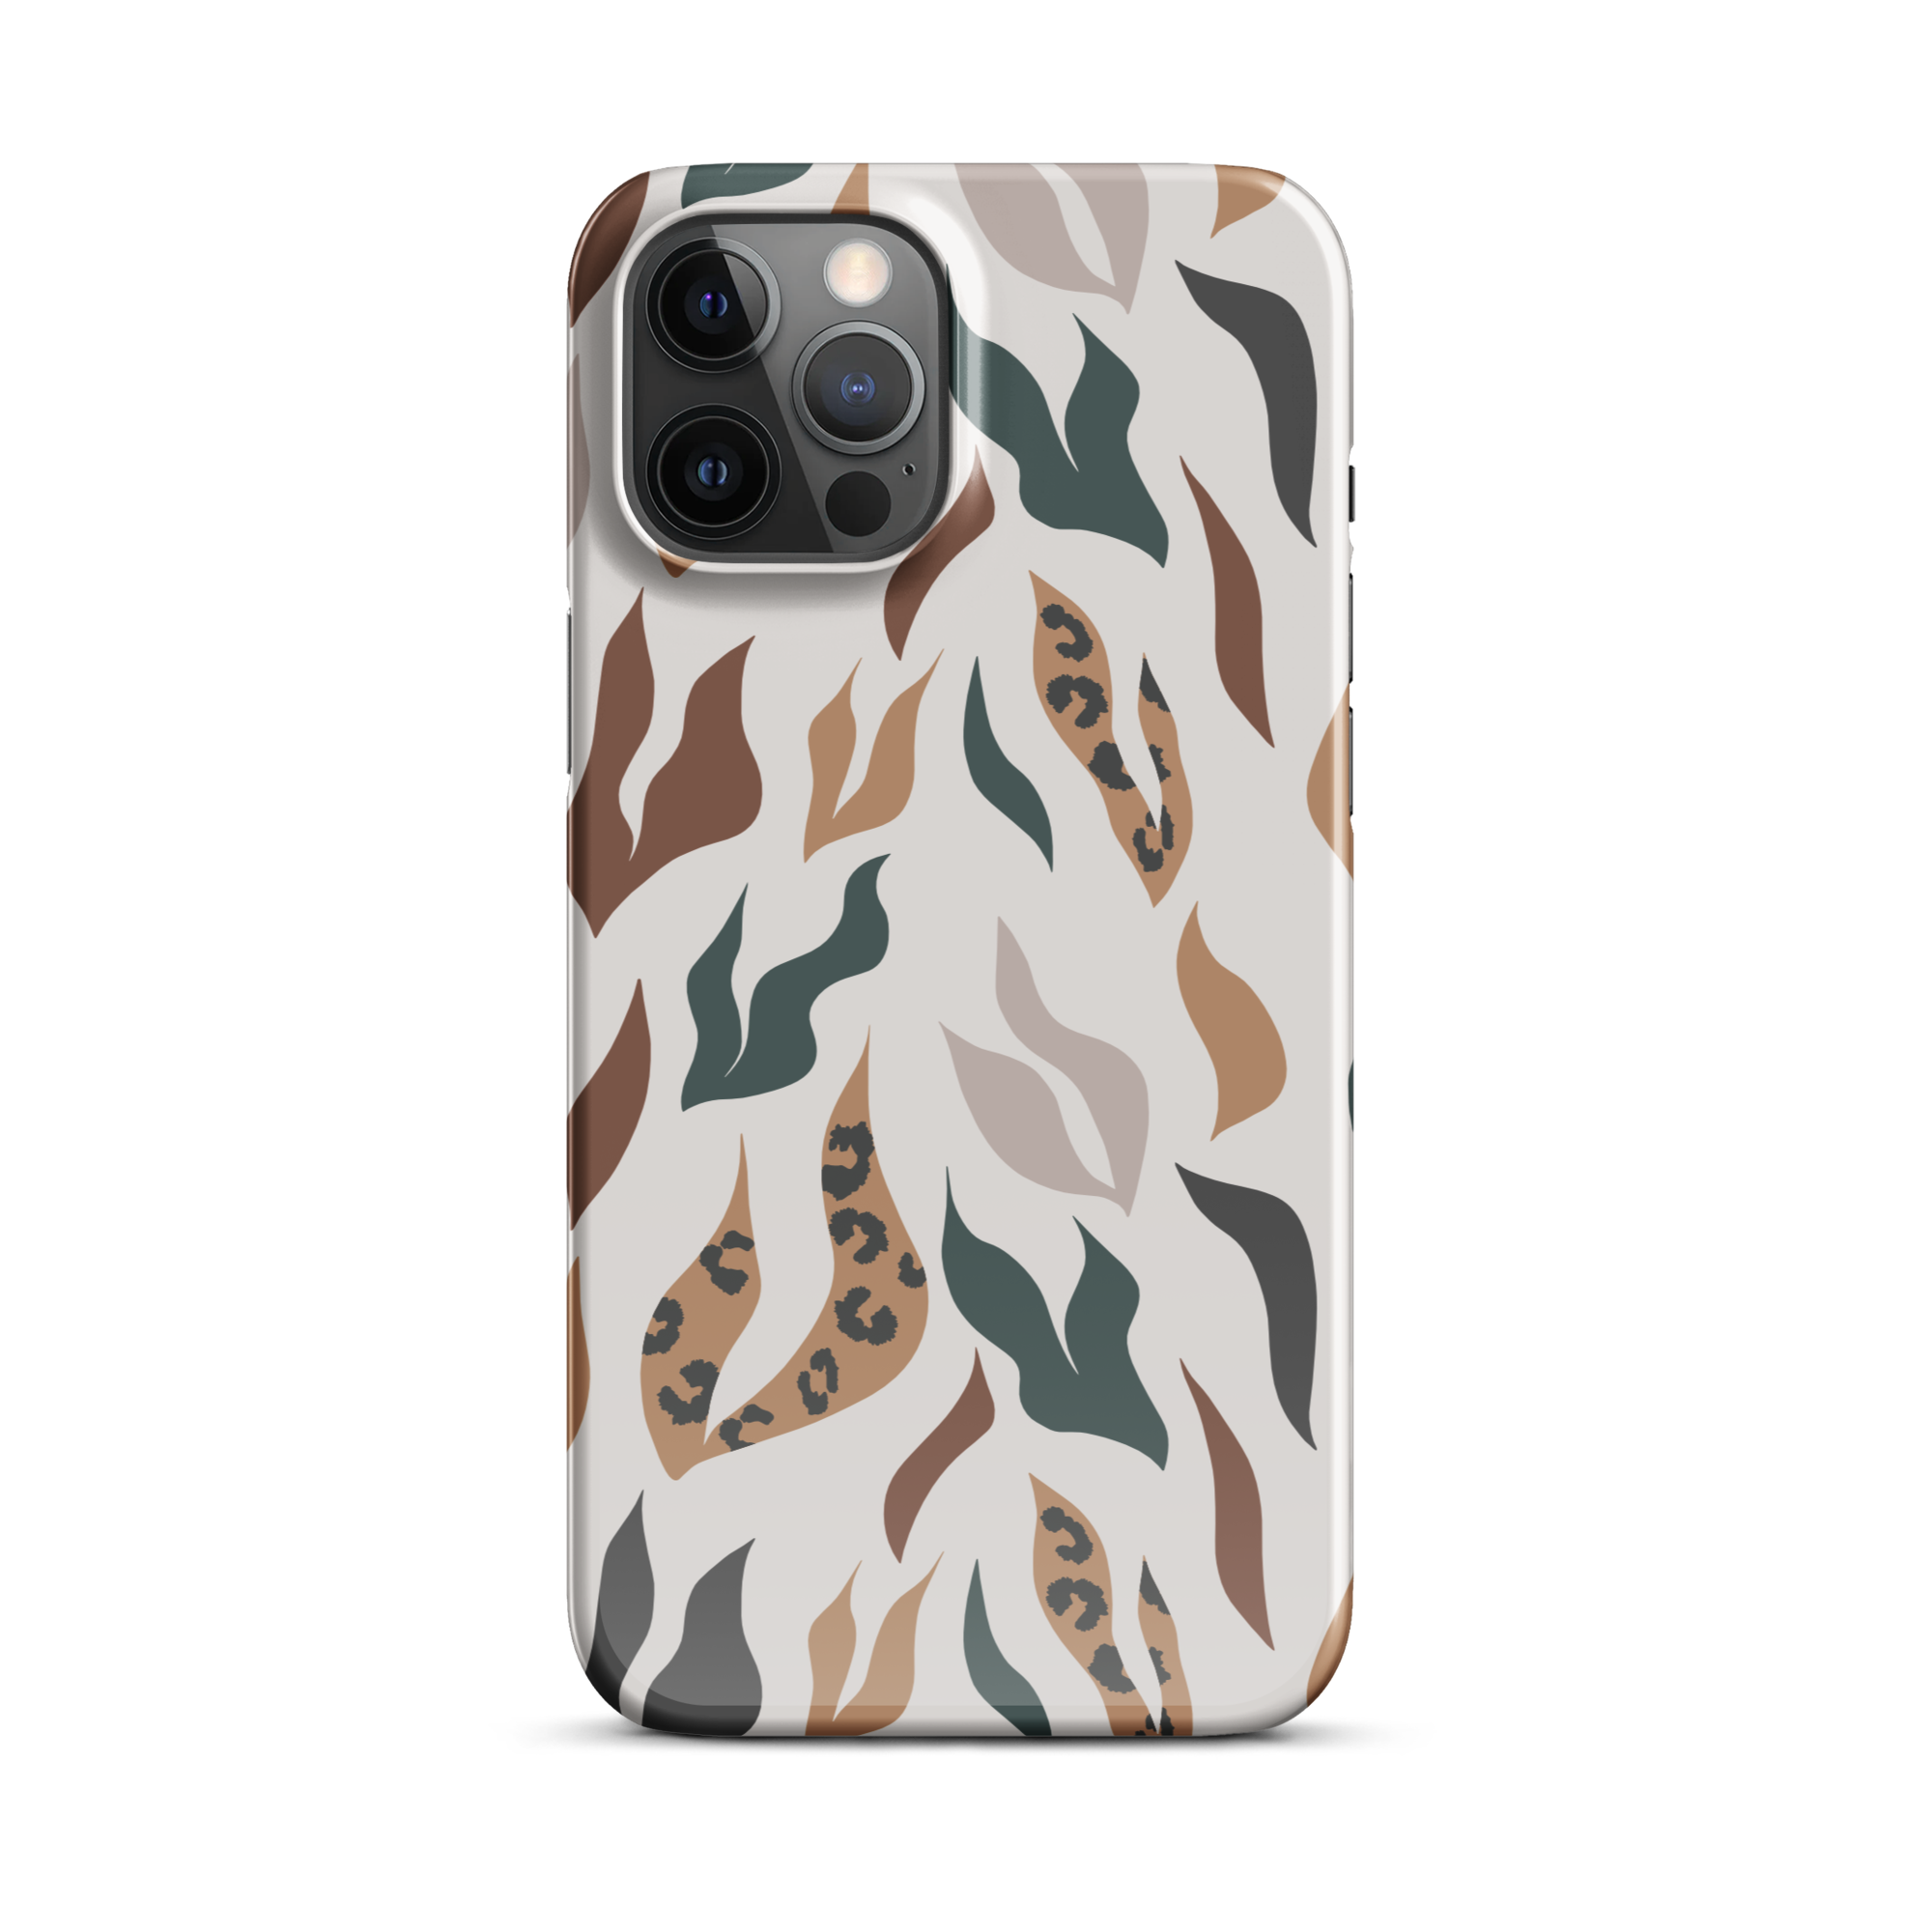 Leopard Leaves iPhone 12 Pro Max Case